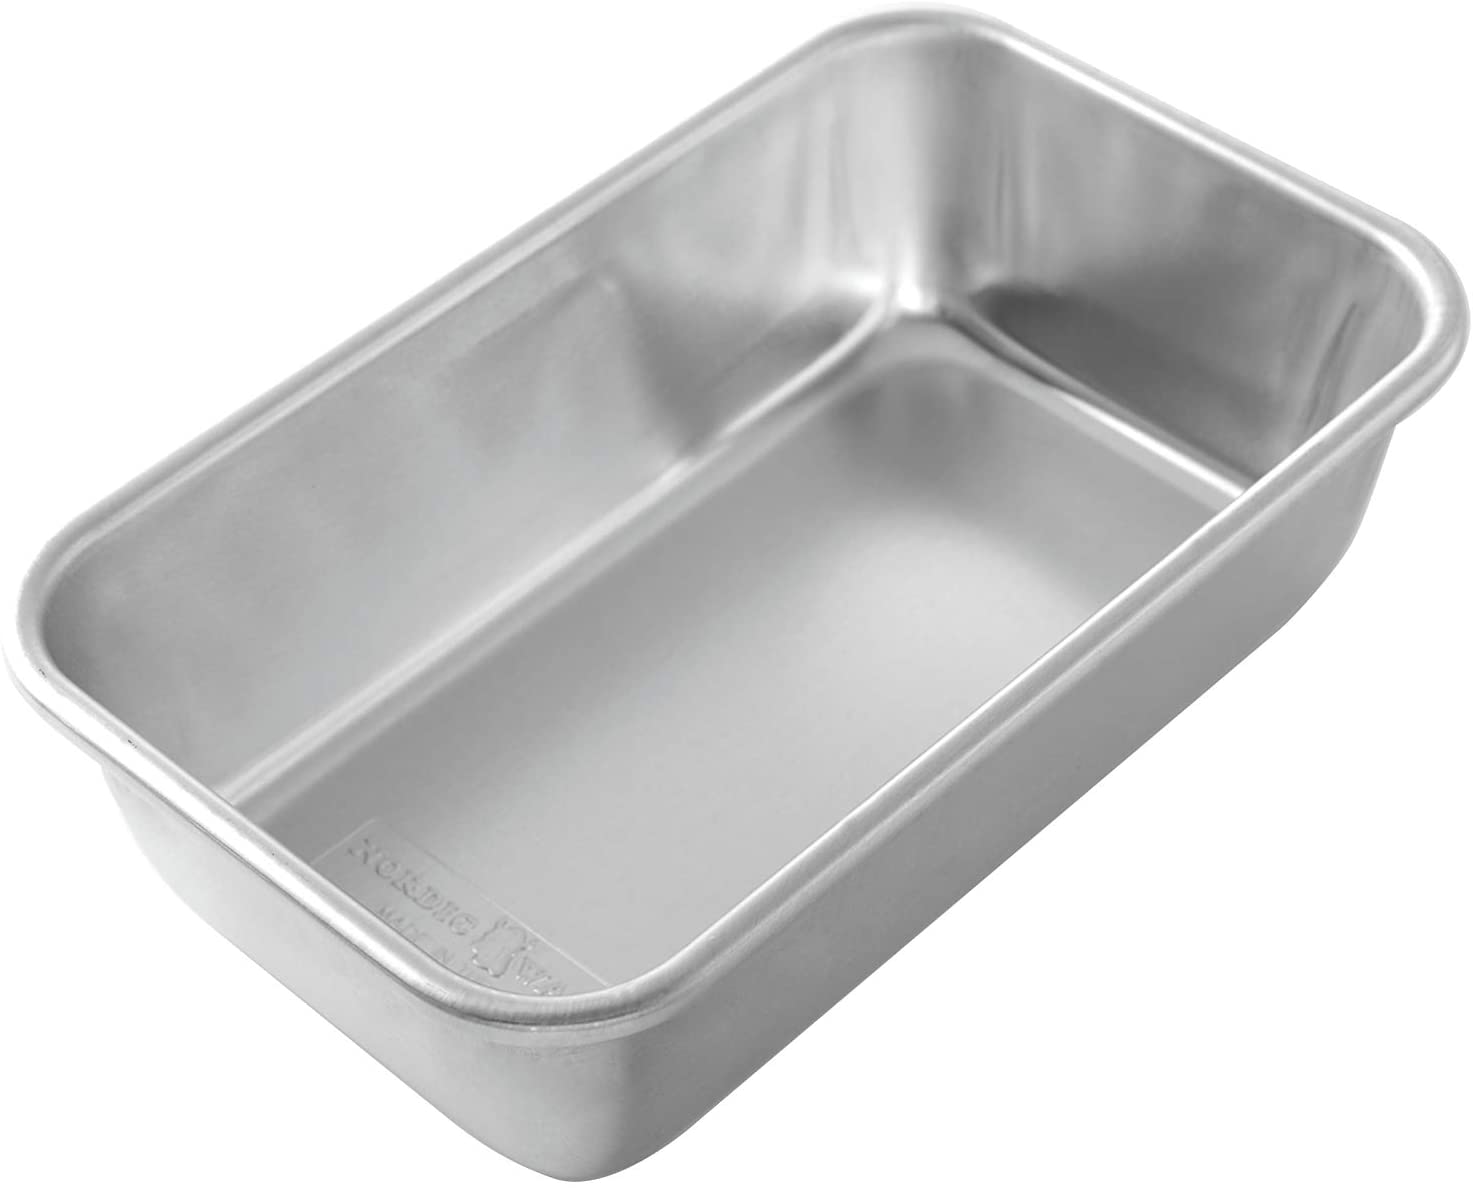 Nordic Ware NATURALS 1.5 Pound Aluminum LOAF PAN or BREAD PAN